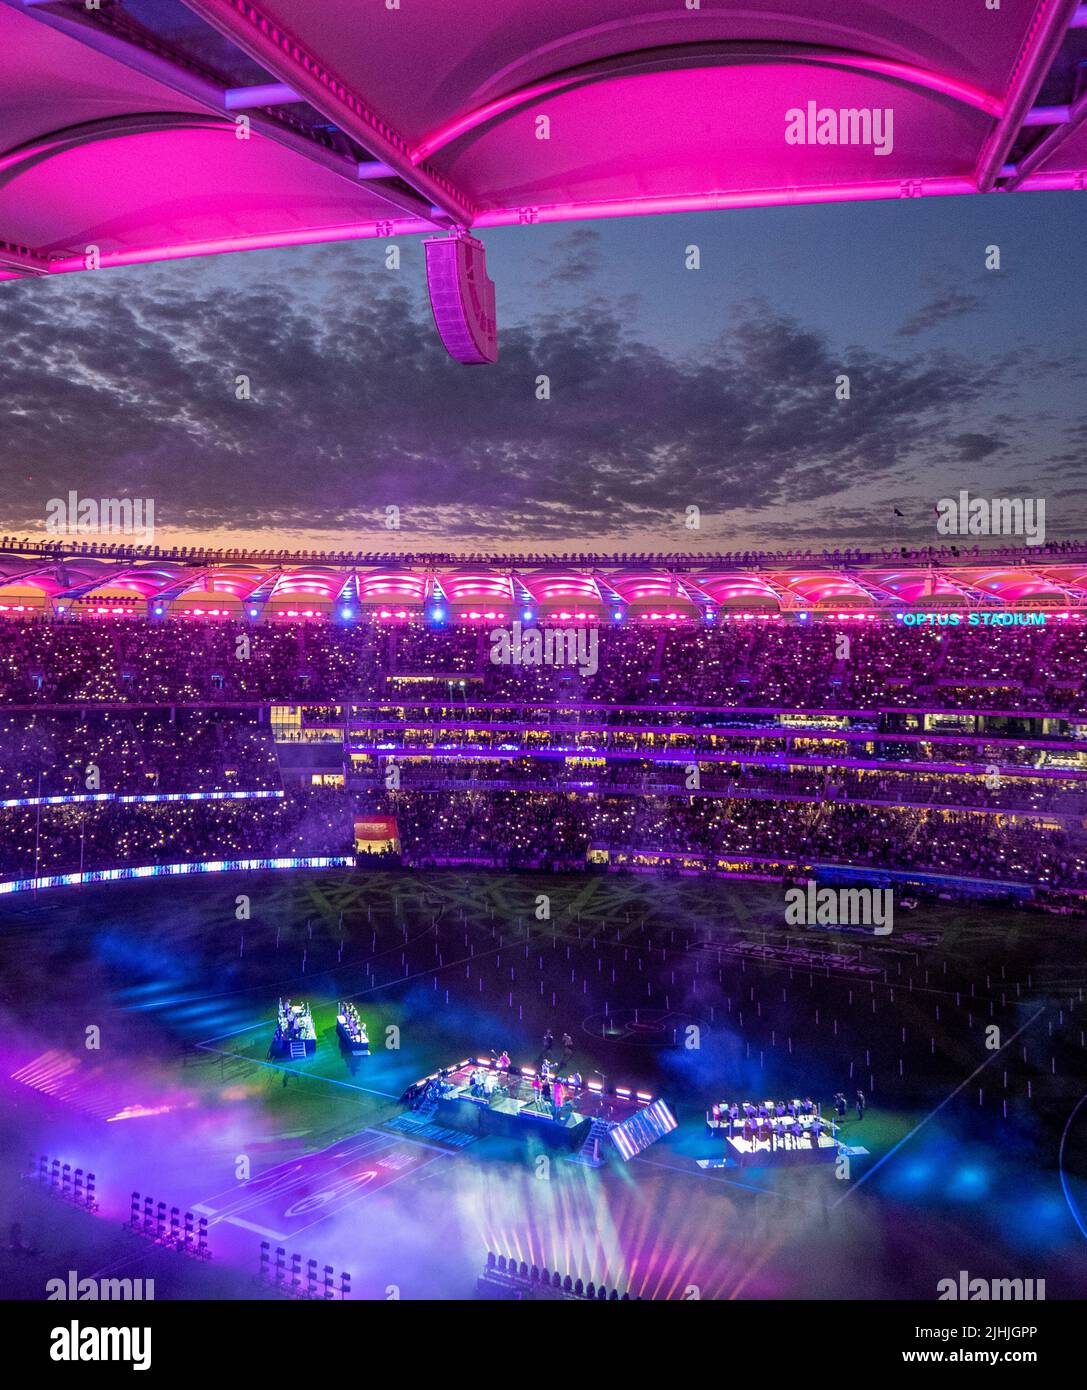 Fullhouse of fans and supporters at Optus Stadium at night lights 2021 AFL Grand Final Perth Western Australia. Stock Photo